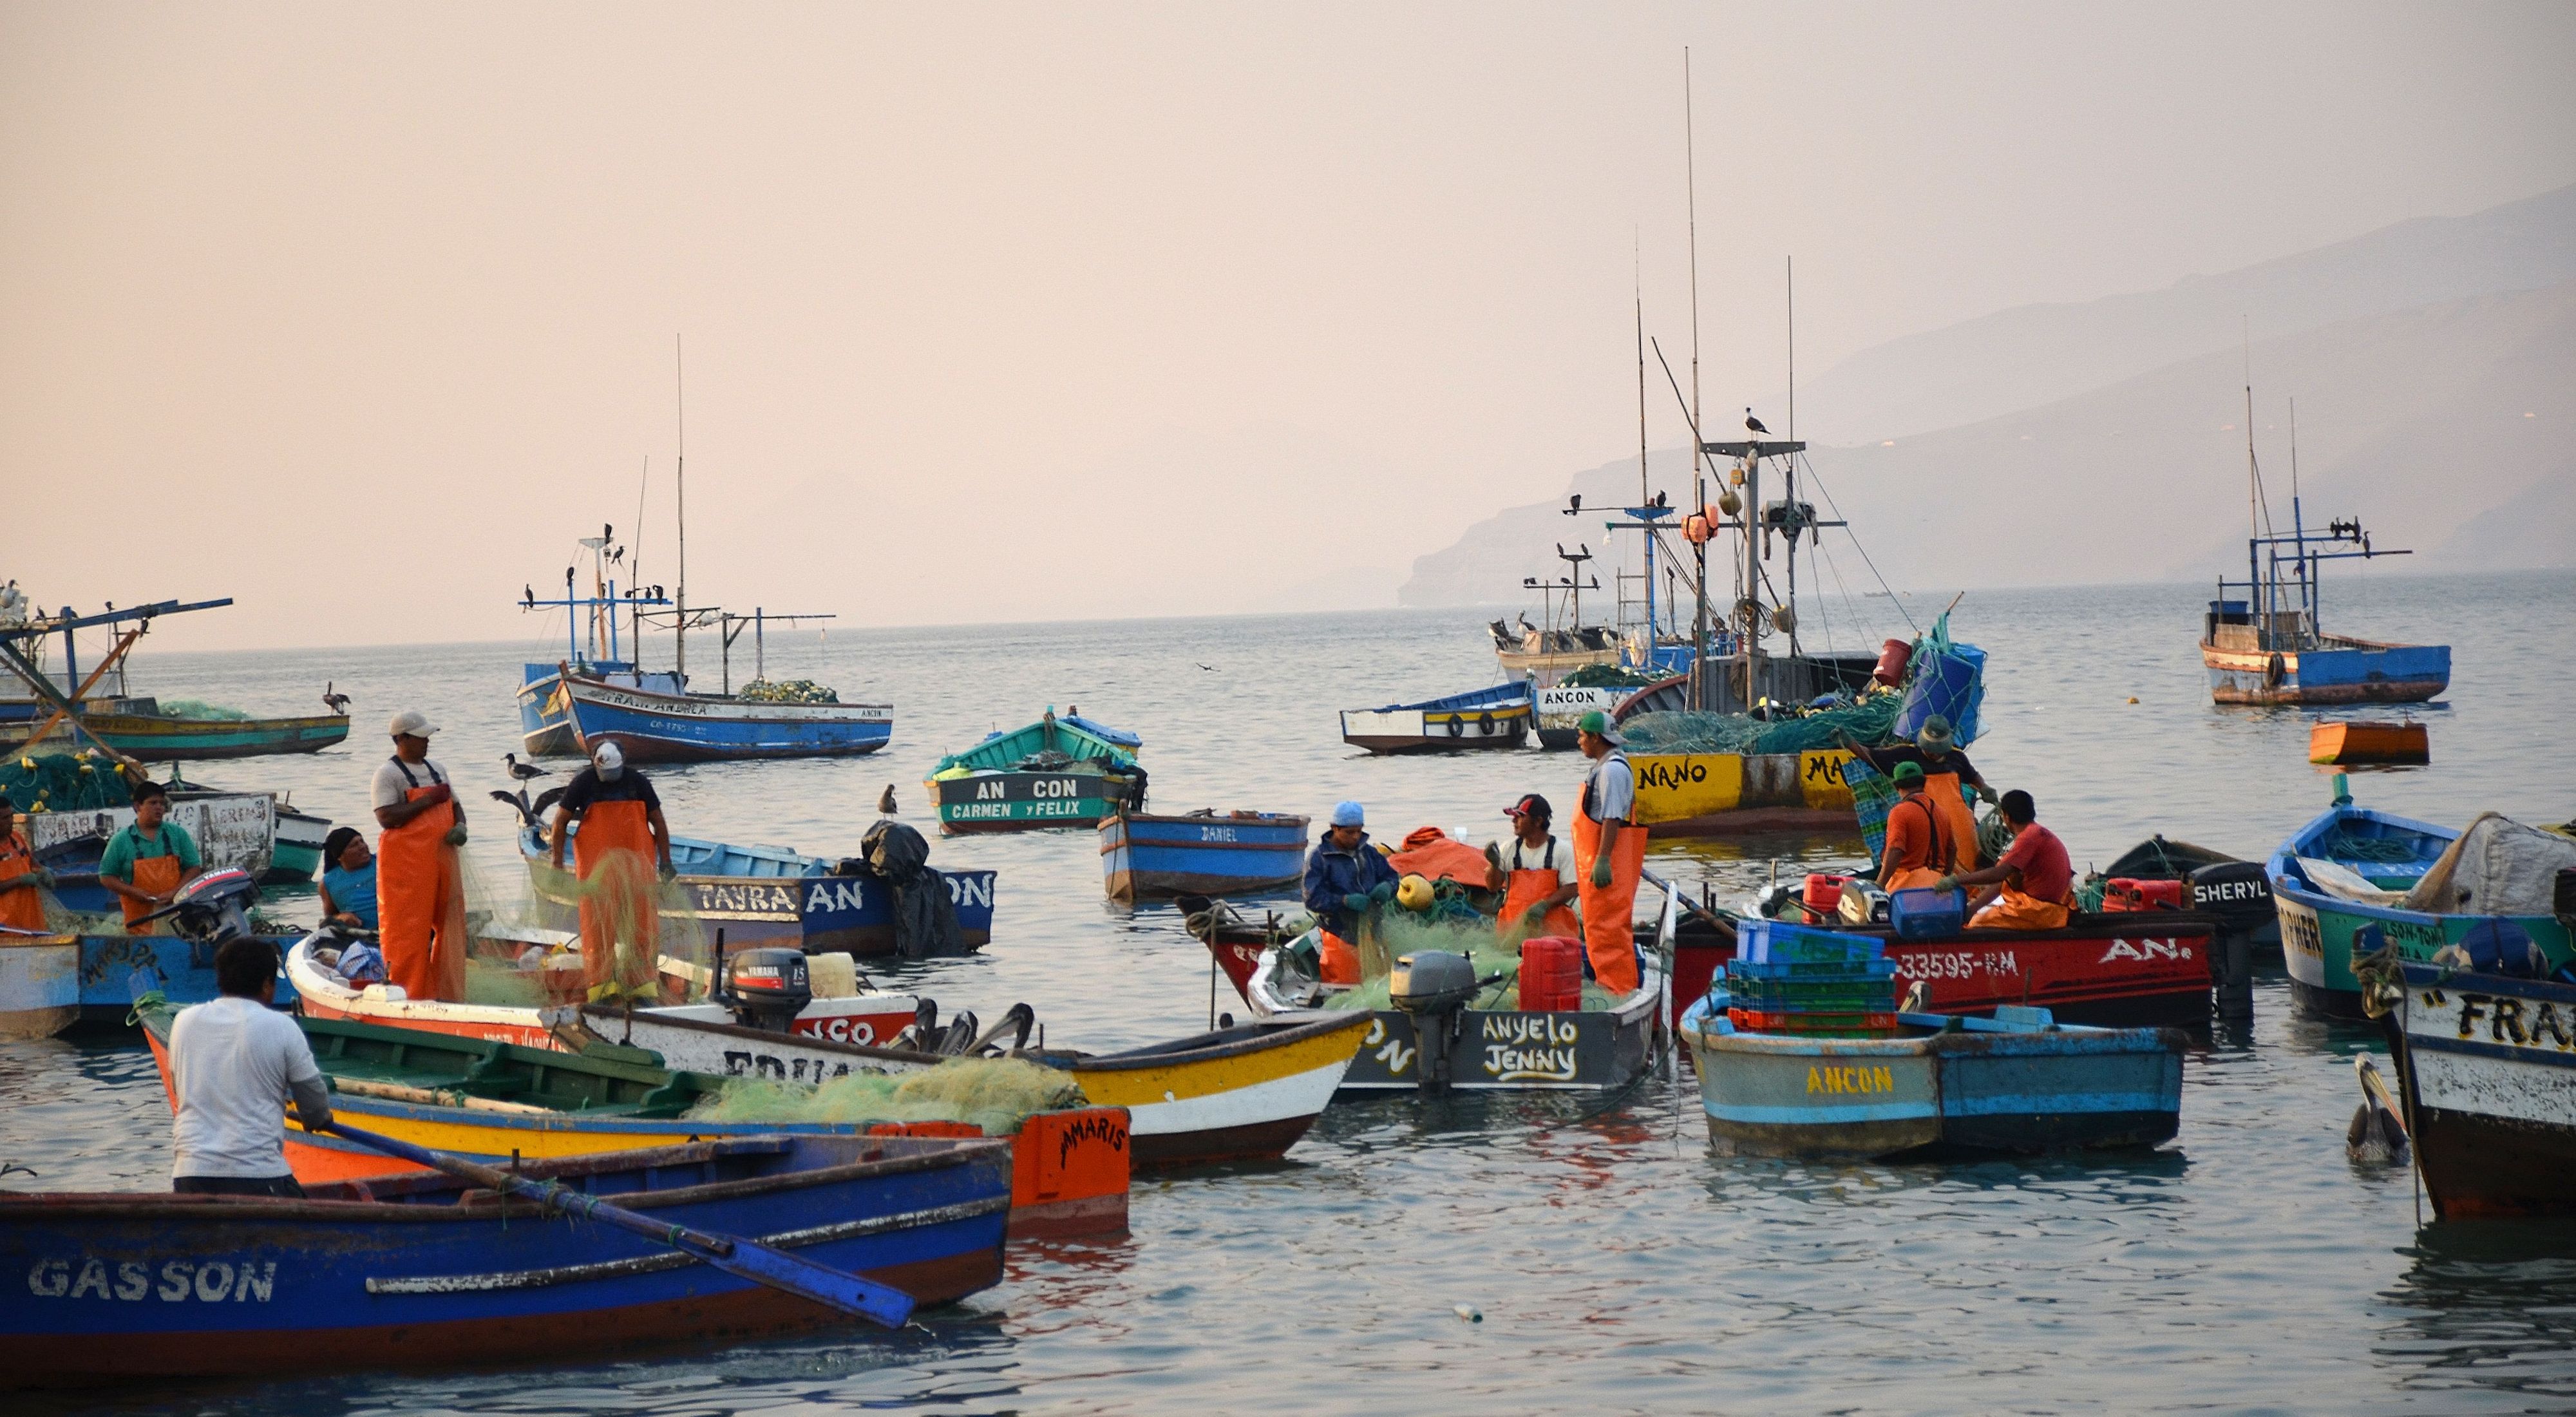 a group of fishers in small fishing boats on the water